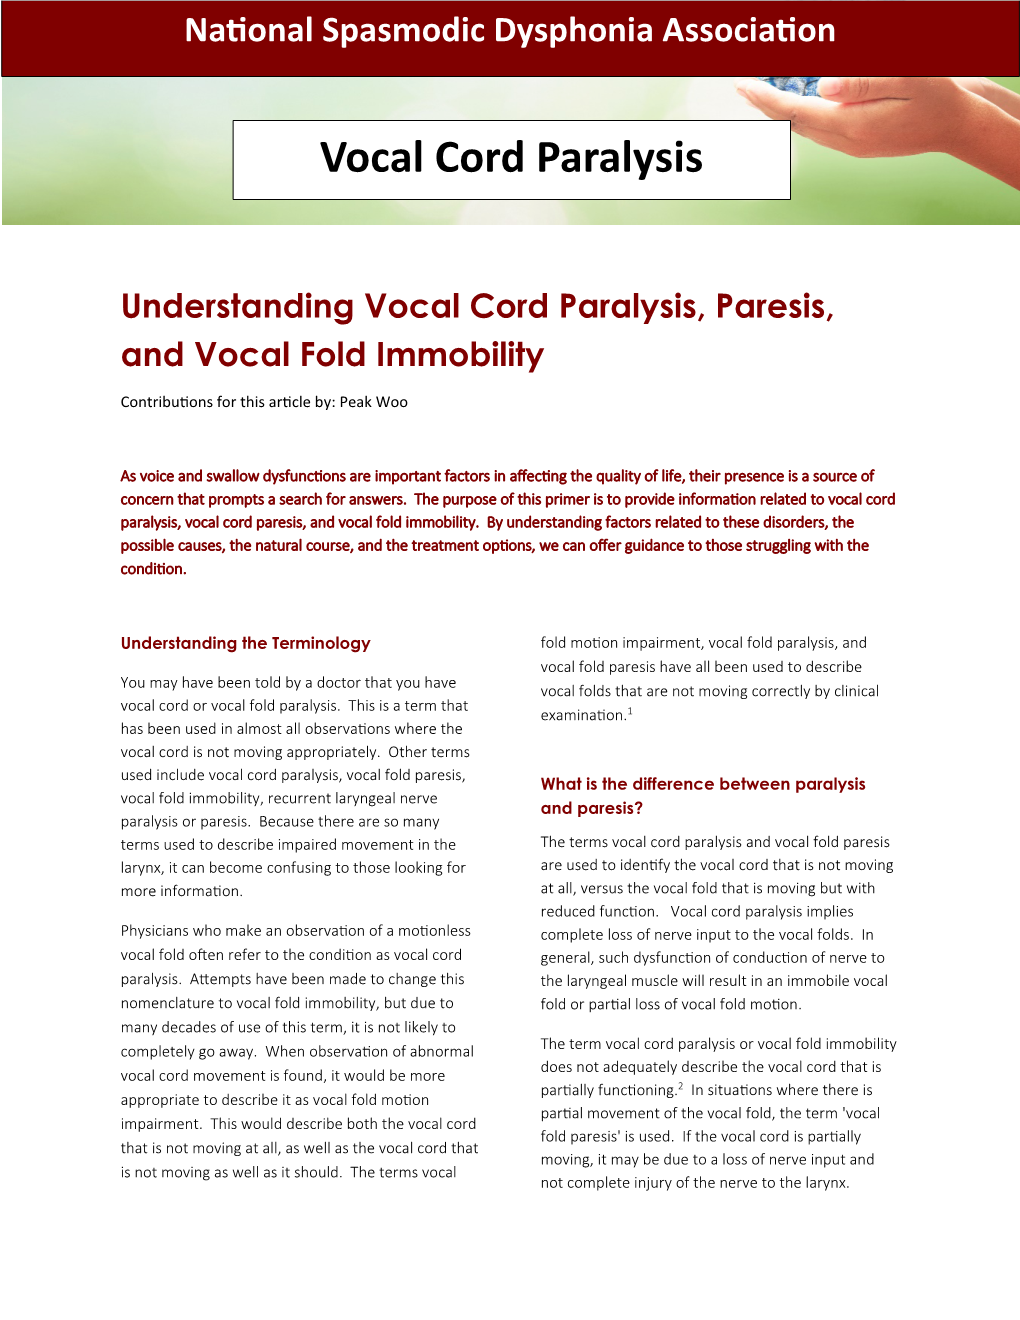 Understanding Vocal Cord Paralysis Paresis And Vocal Fold Immobility Docslib 0276